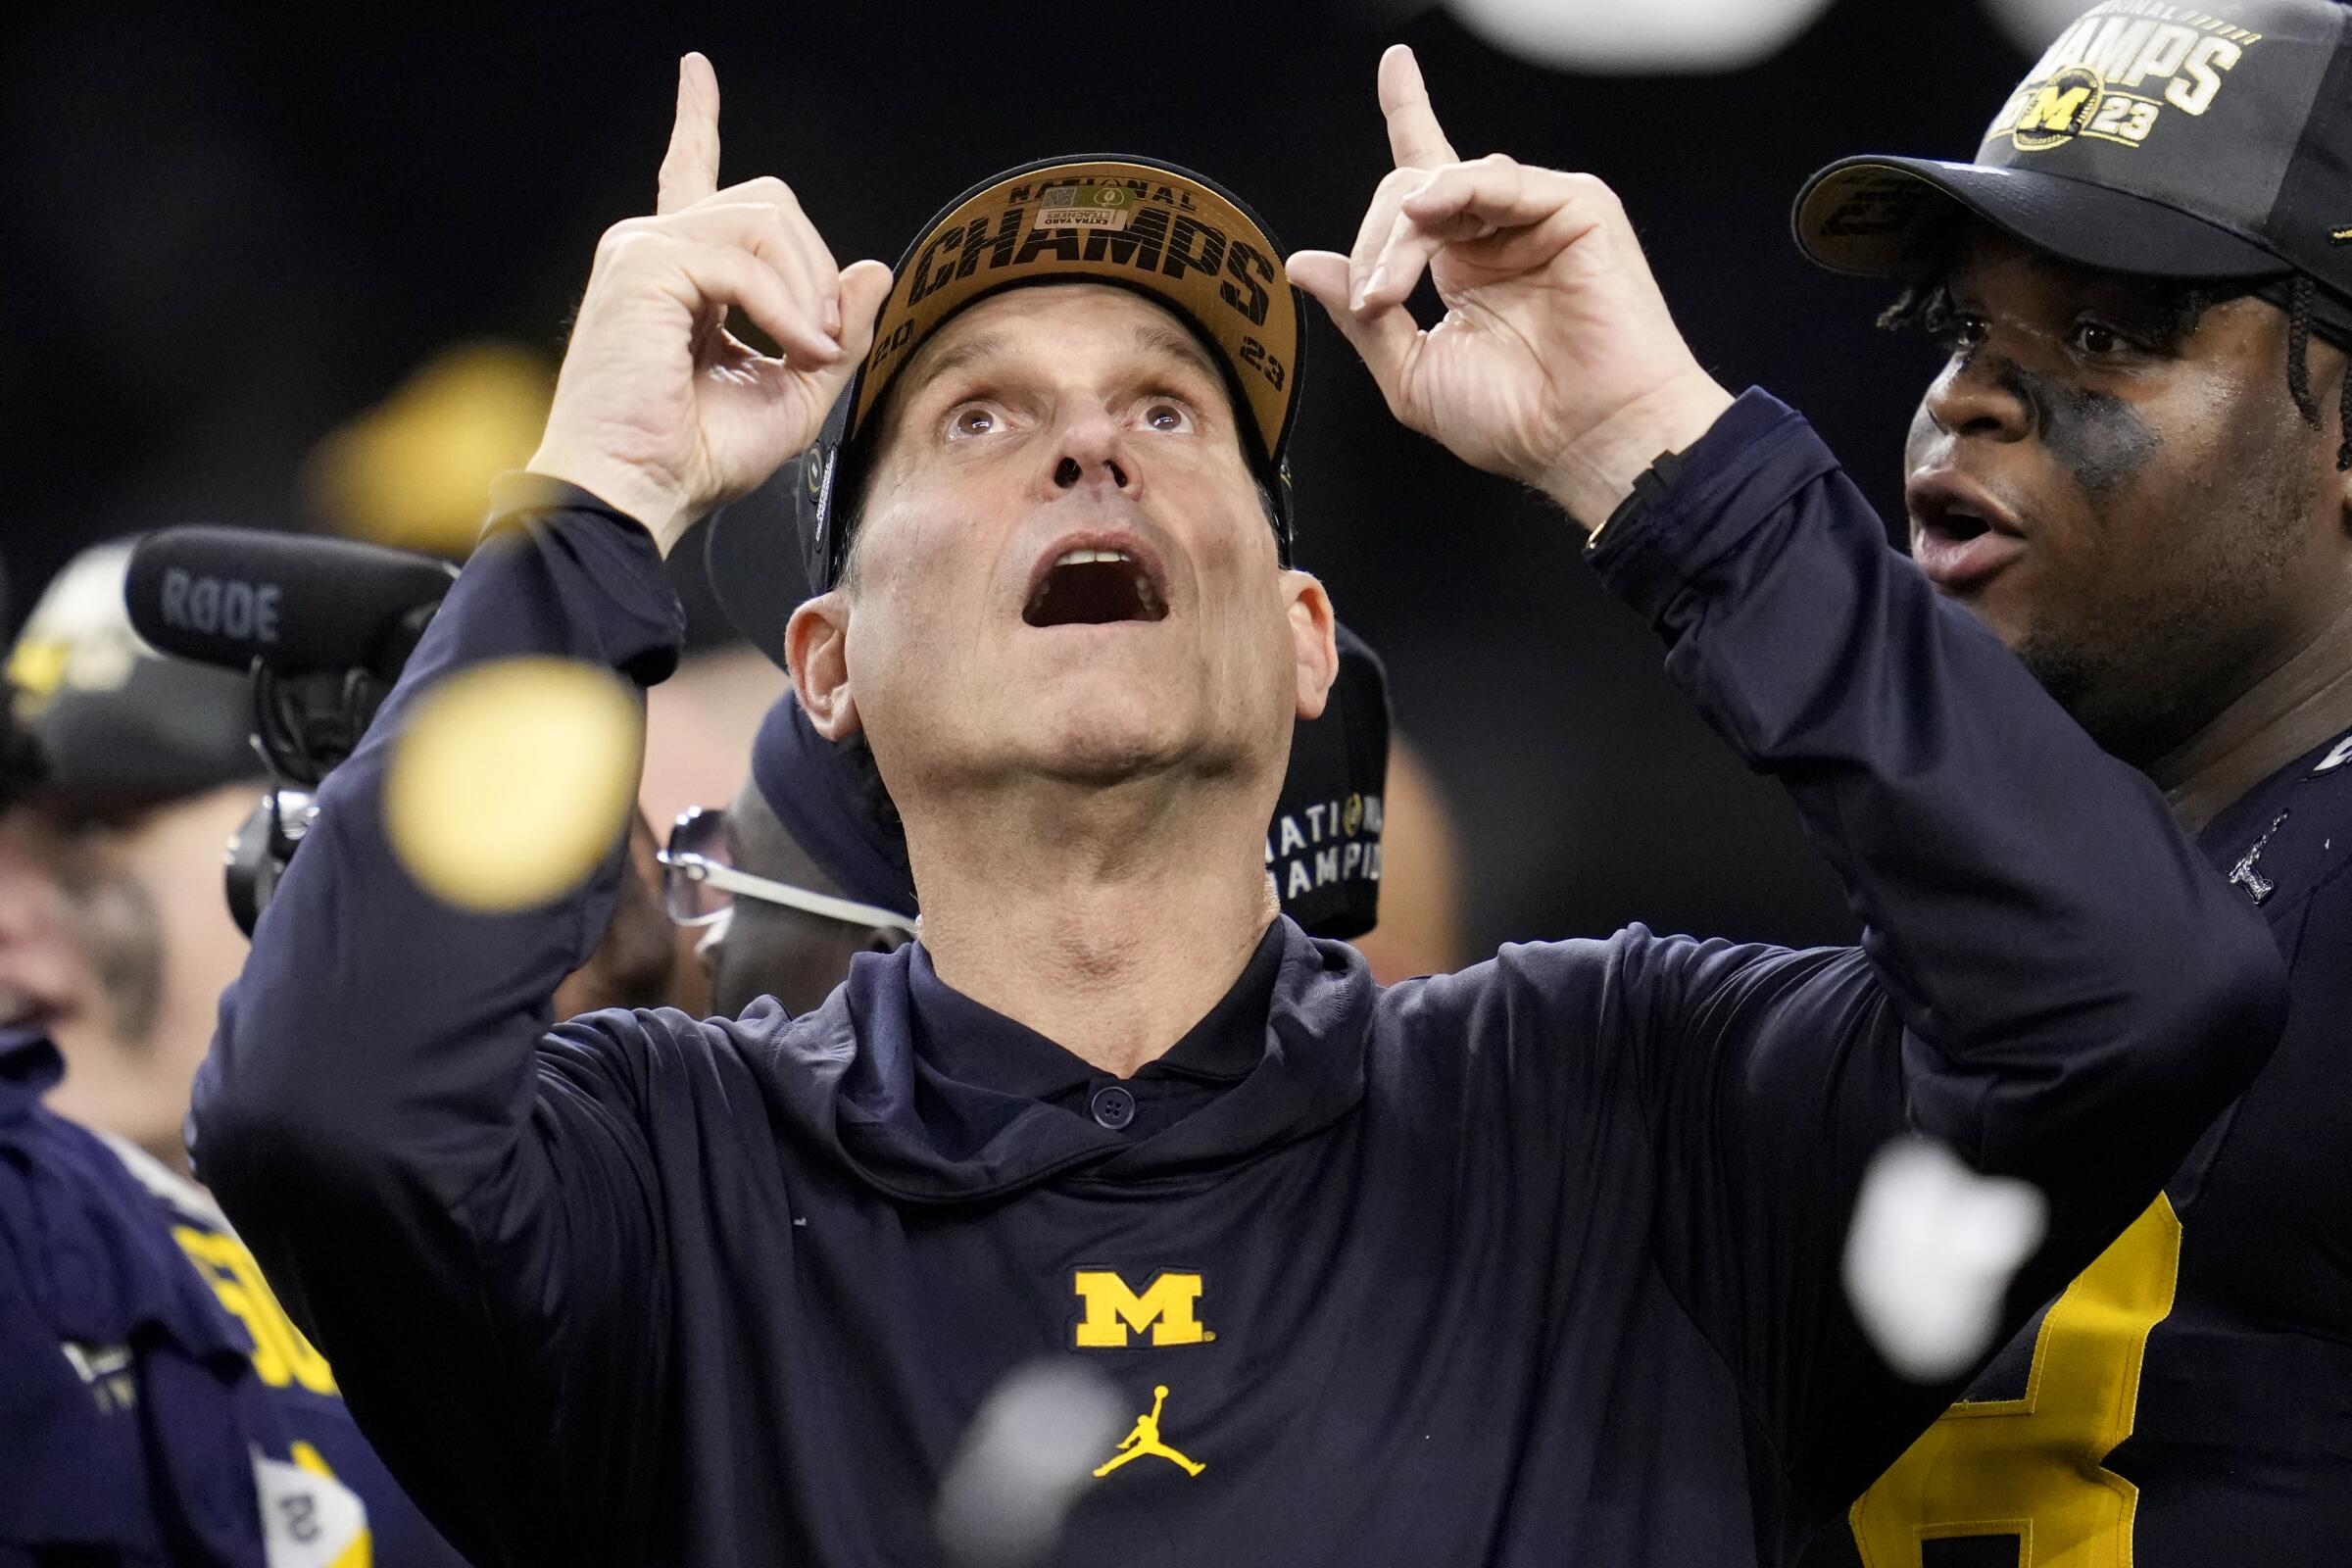 Jim Harbaugh celebrates after guiding Michigan to a national championship victory over Washington.